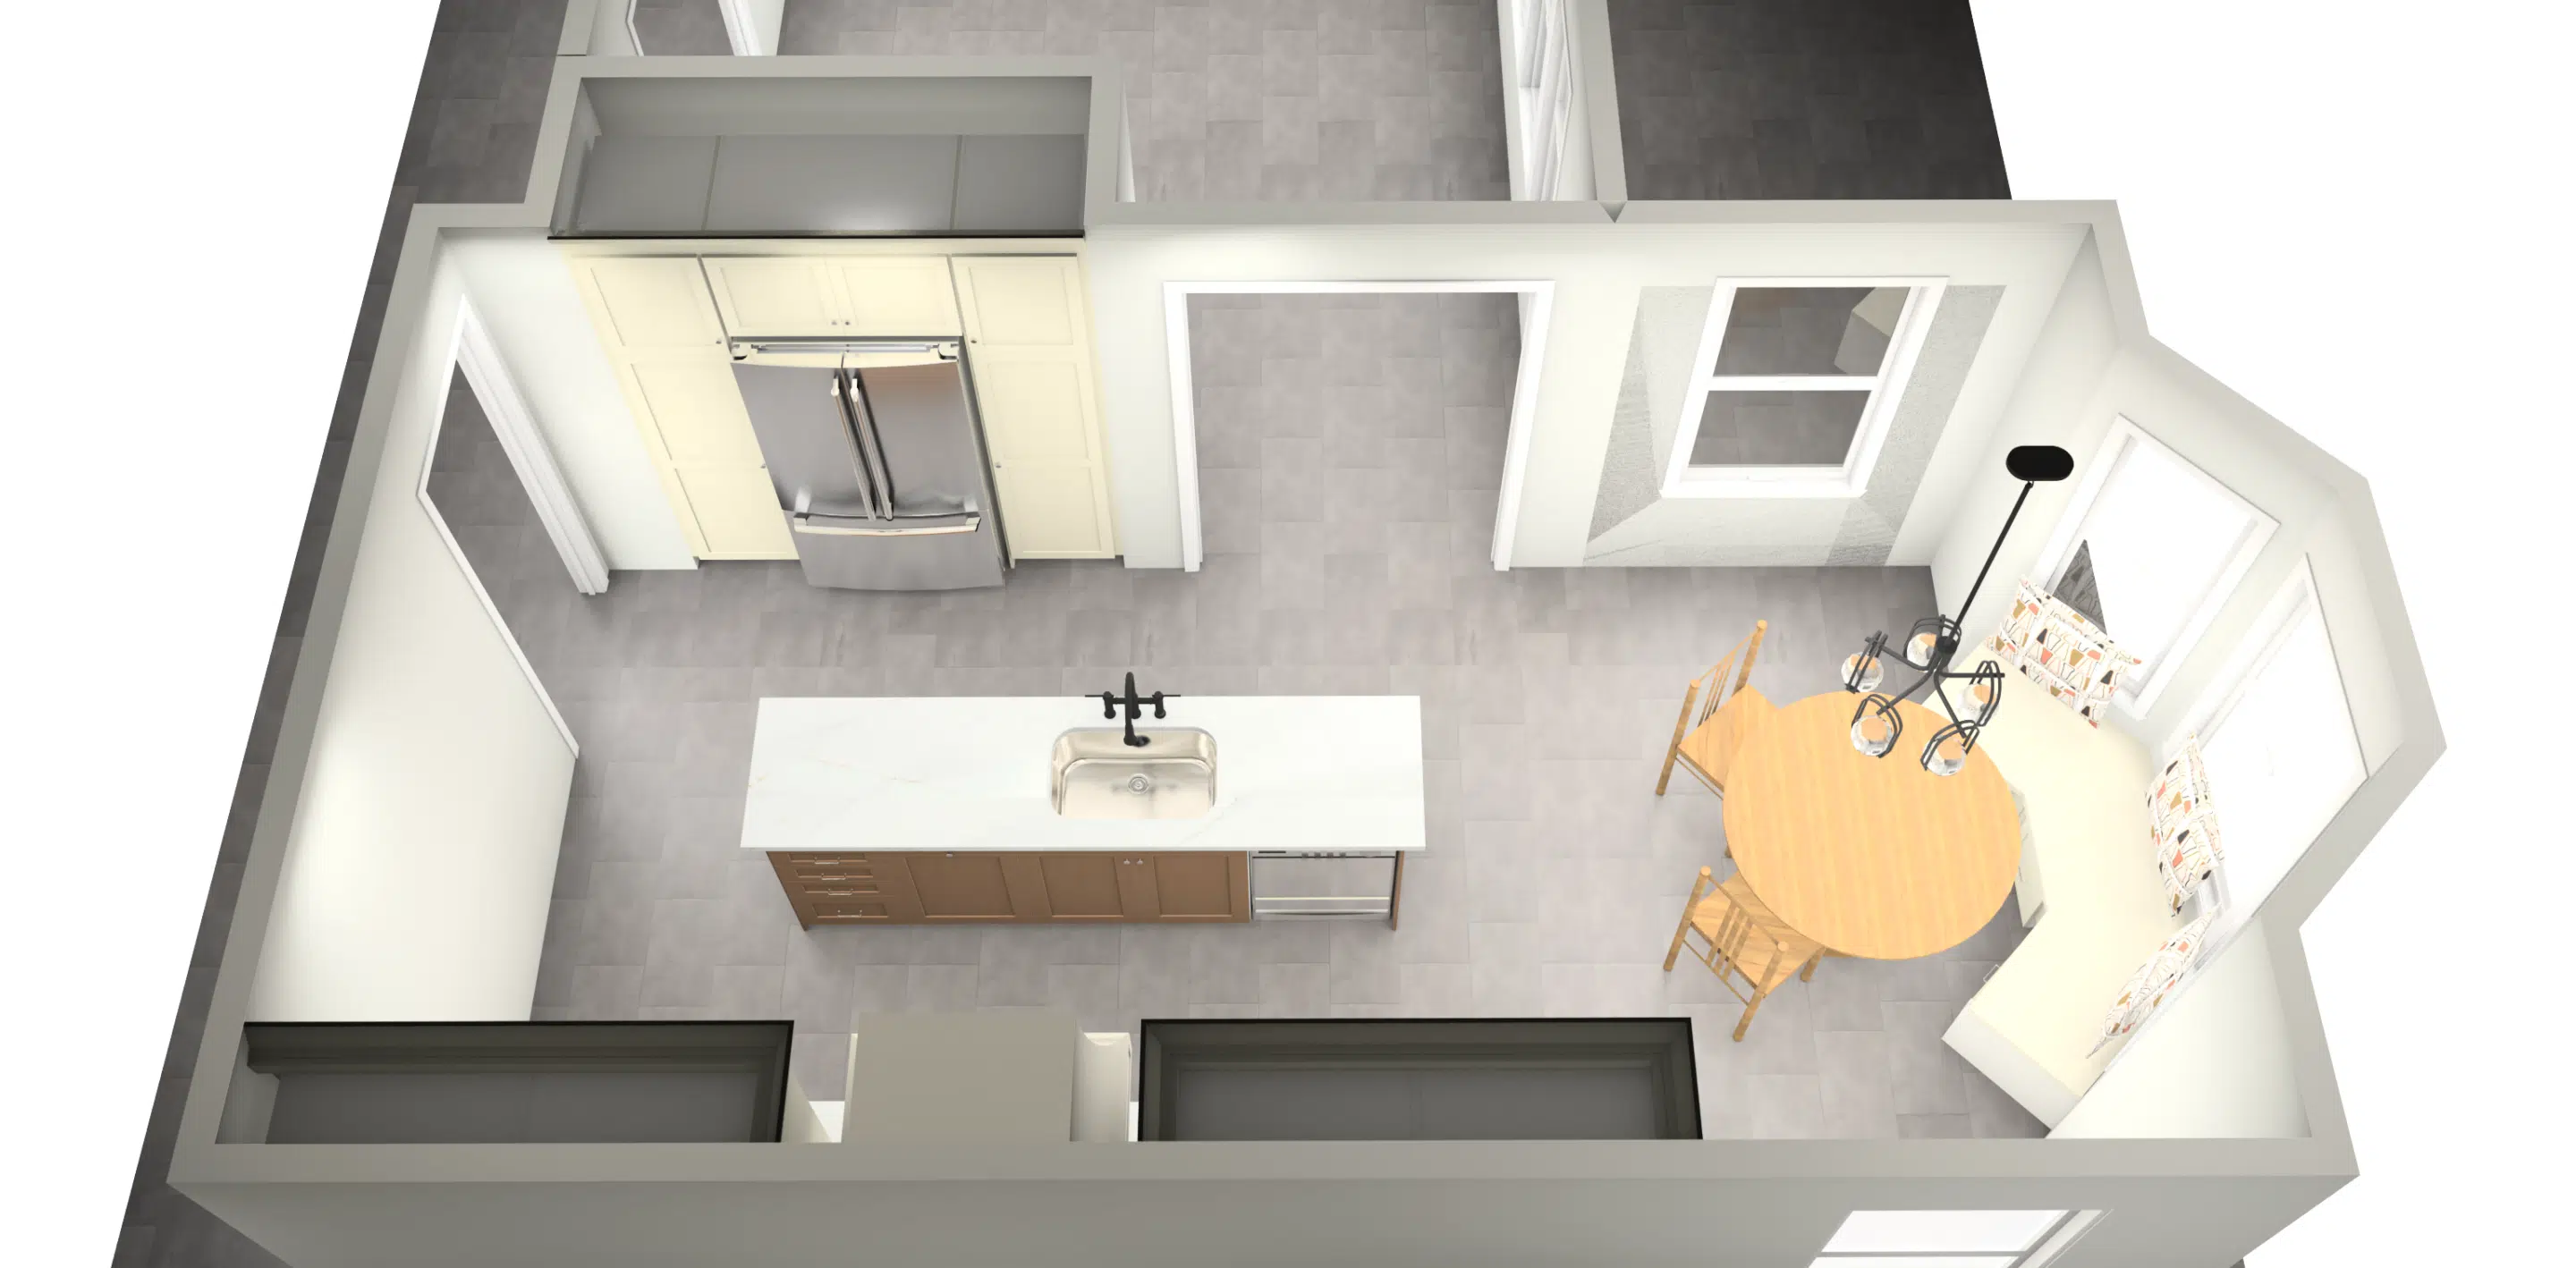 after rendering of kitchen